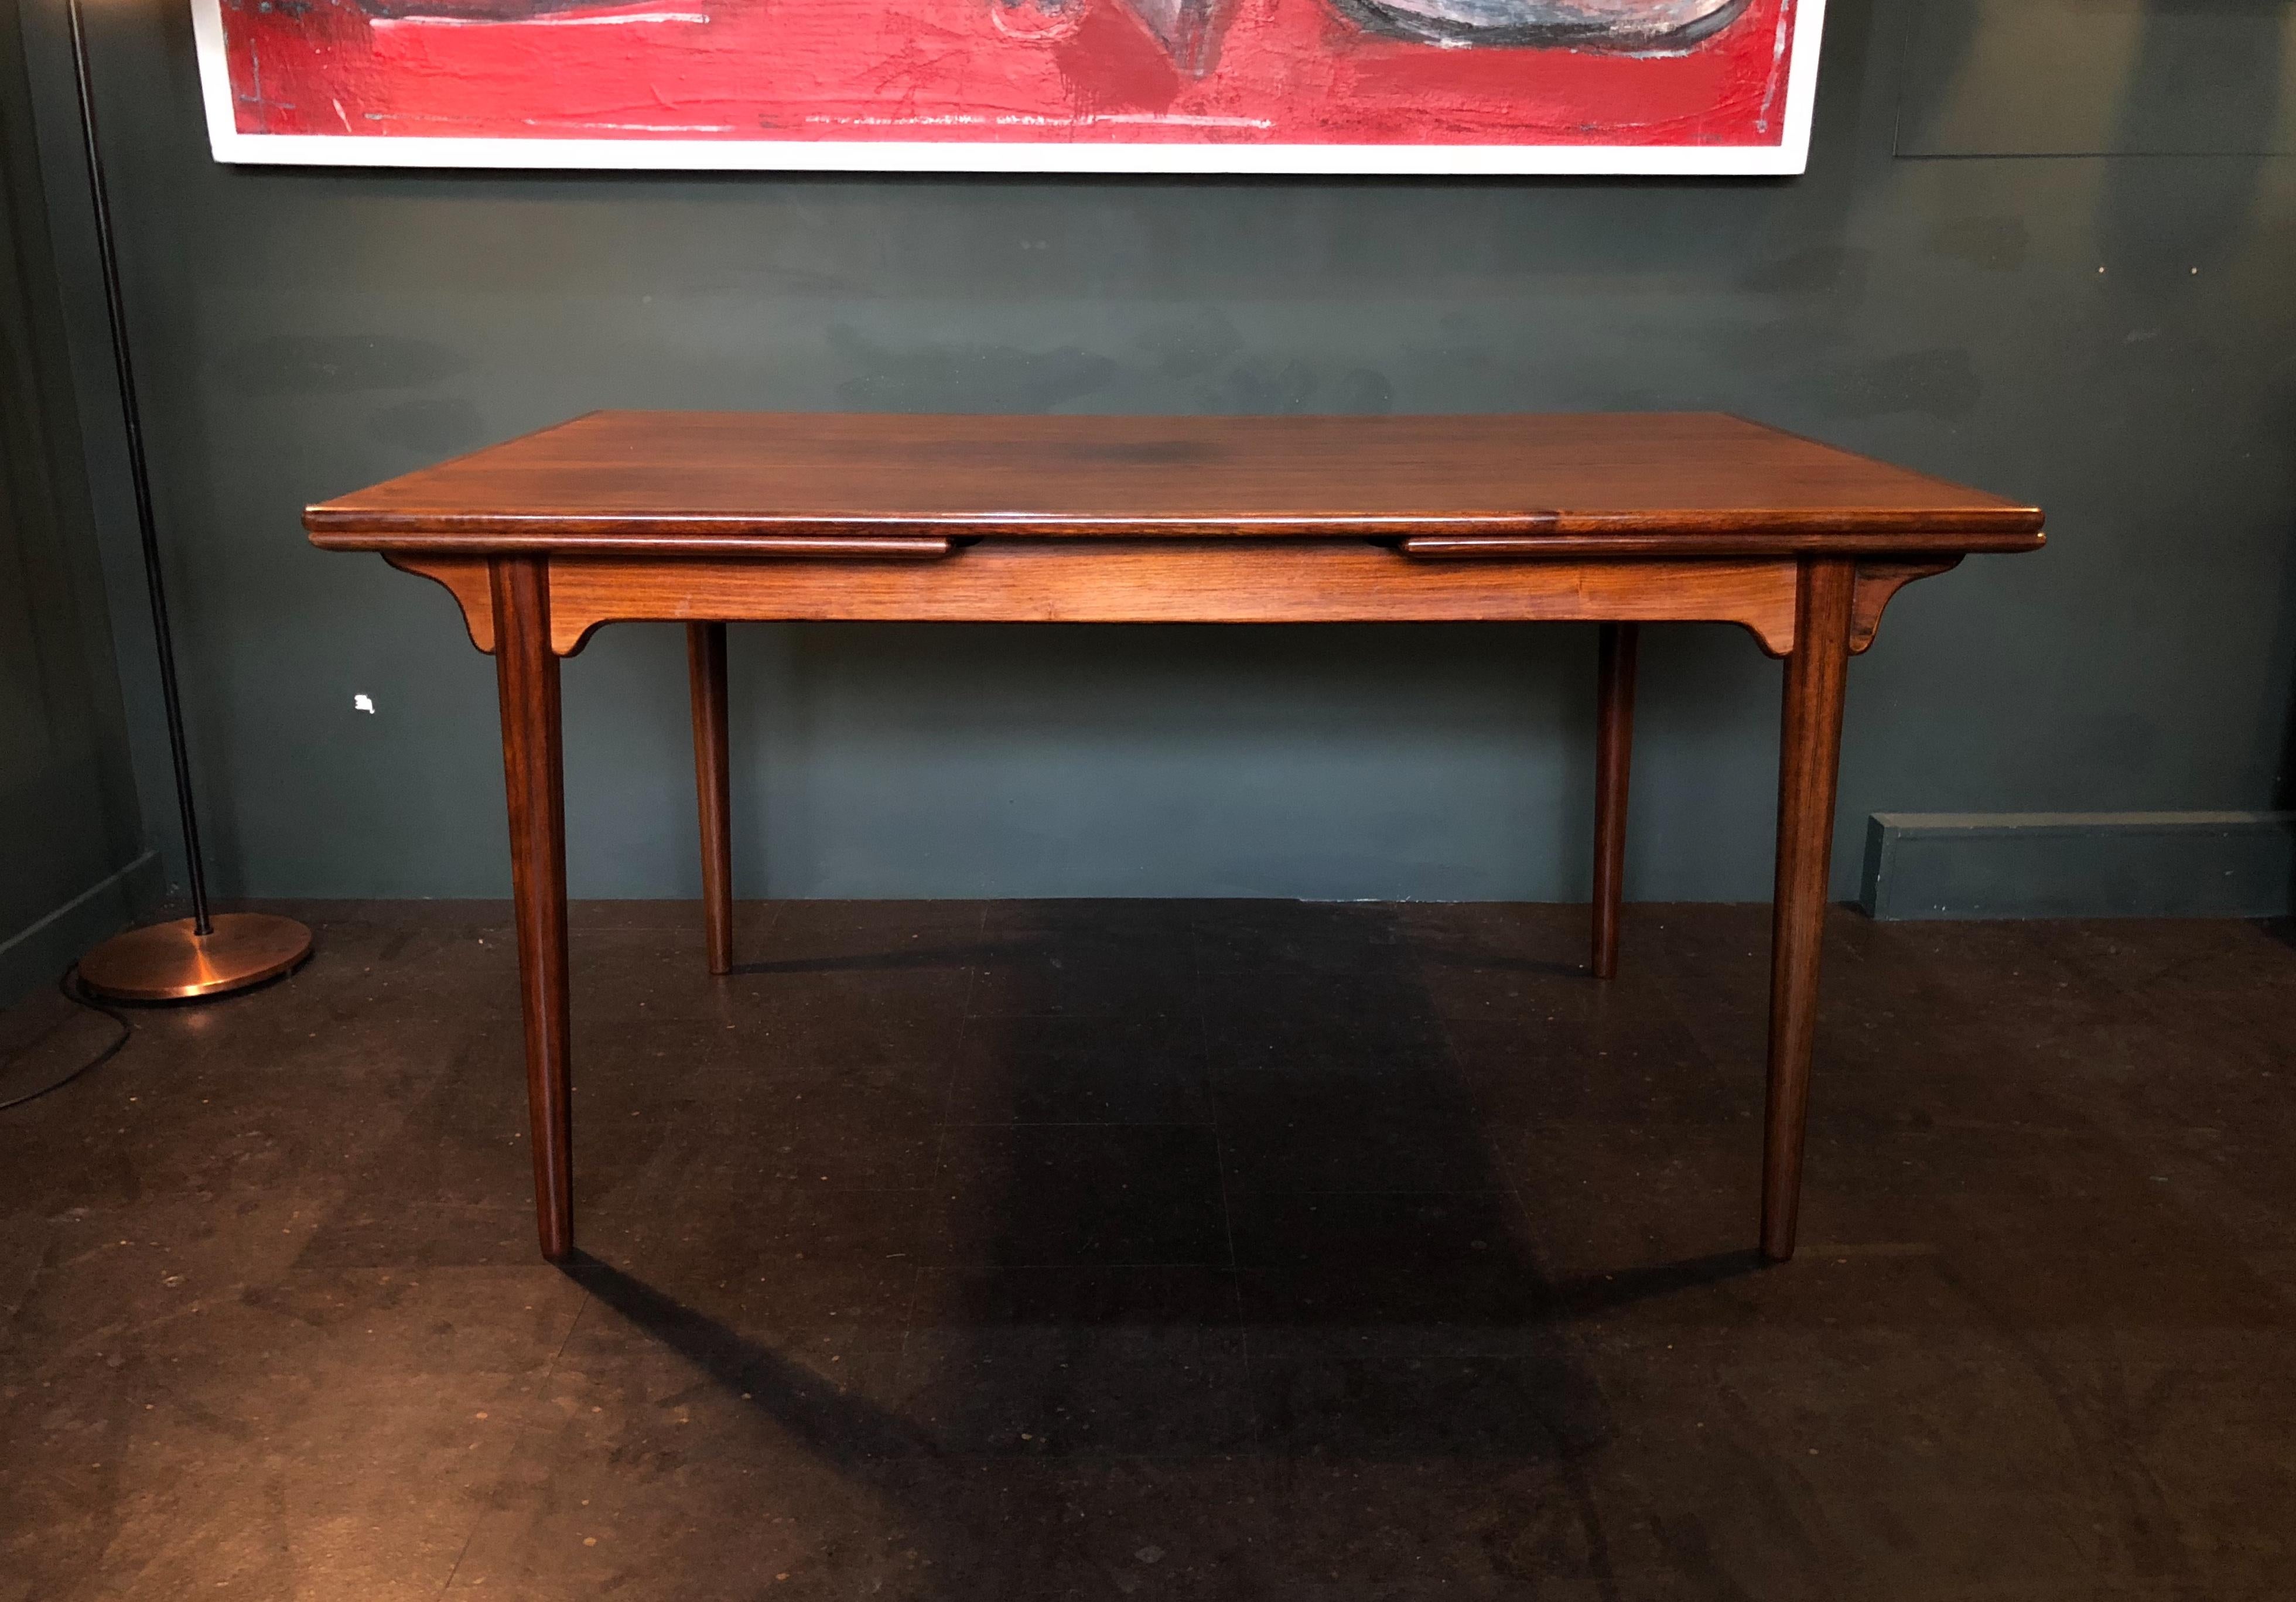 Danish Midcentury rosewood dining table designed by Gunni Omann for Omann Jun, Denmark, 1960s. This table has two pull-out extending leaves to a maximum of 251cm. The table surfaces have been refurbished and finished in traditional Danish oil. A